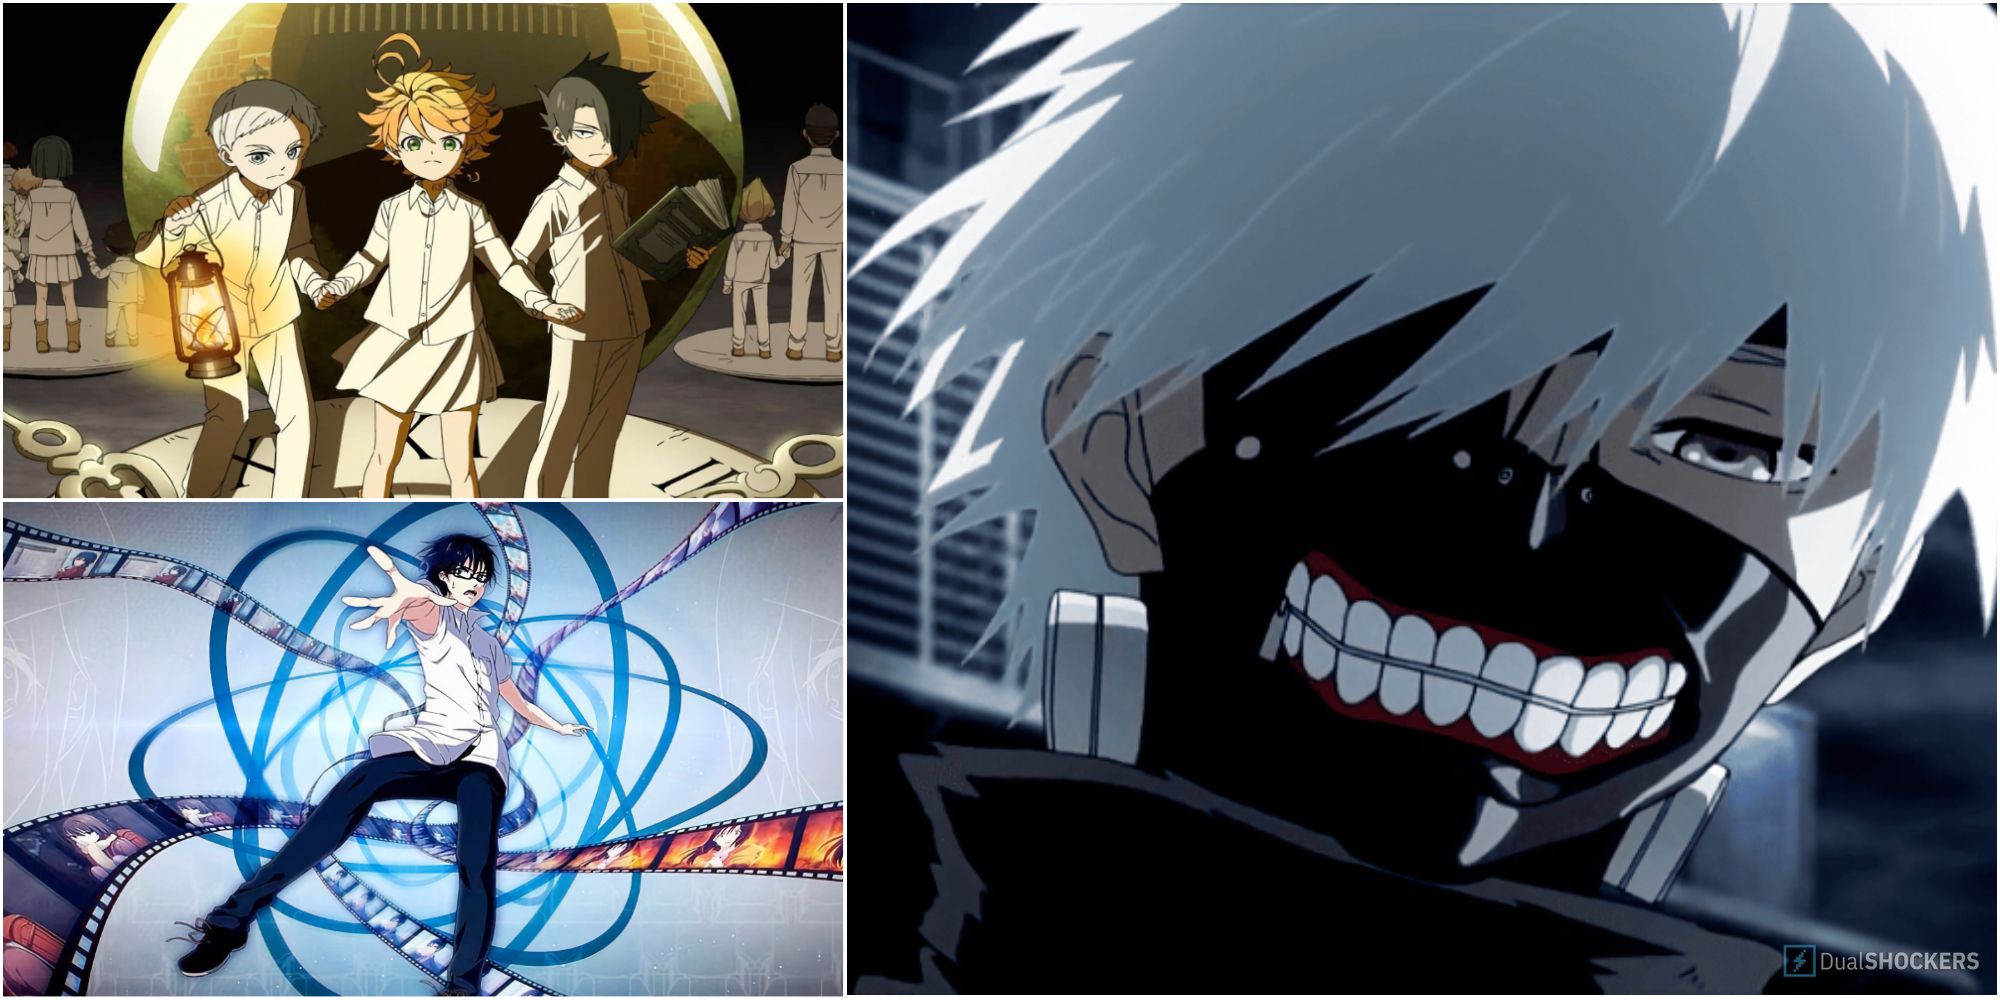 5 craziest Anime fan theories that came true (and 5 that never did)